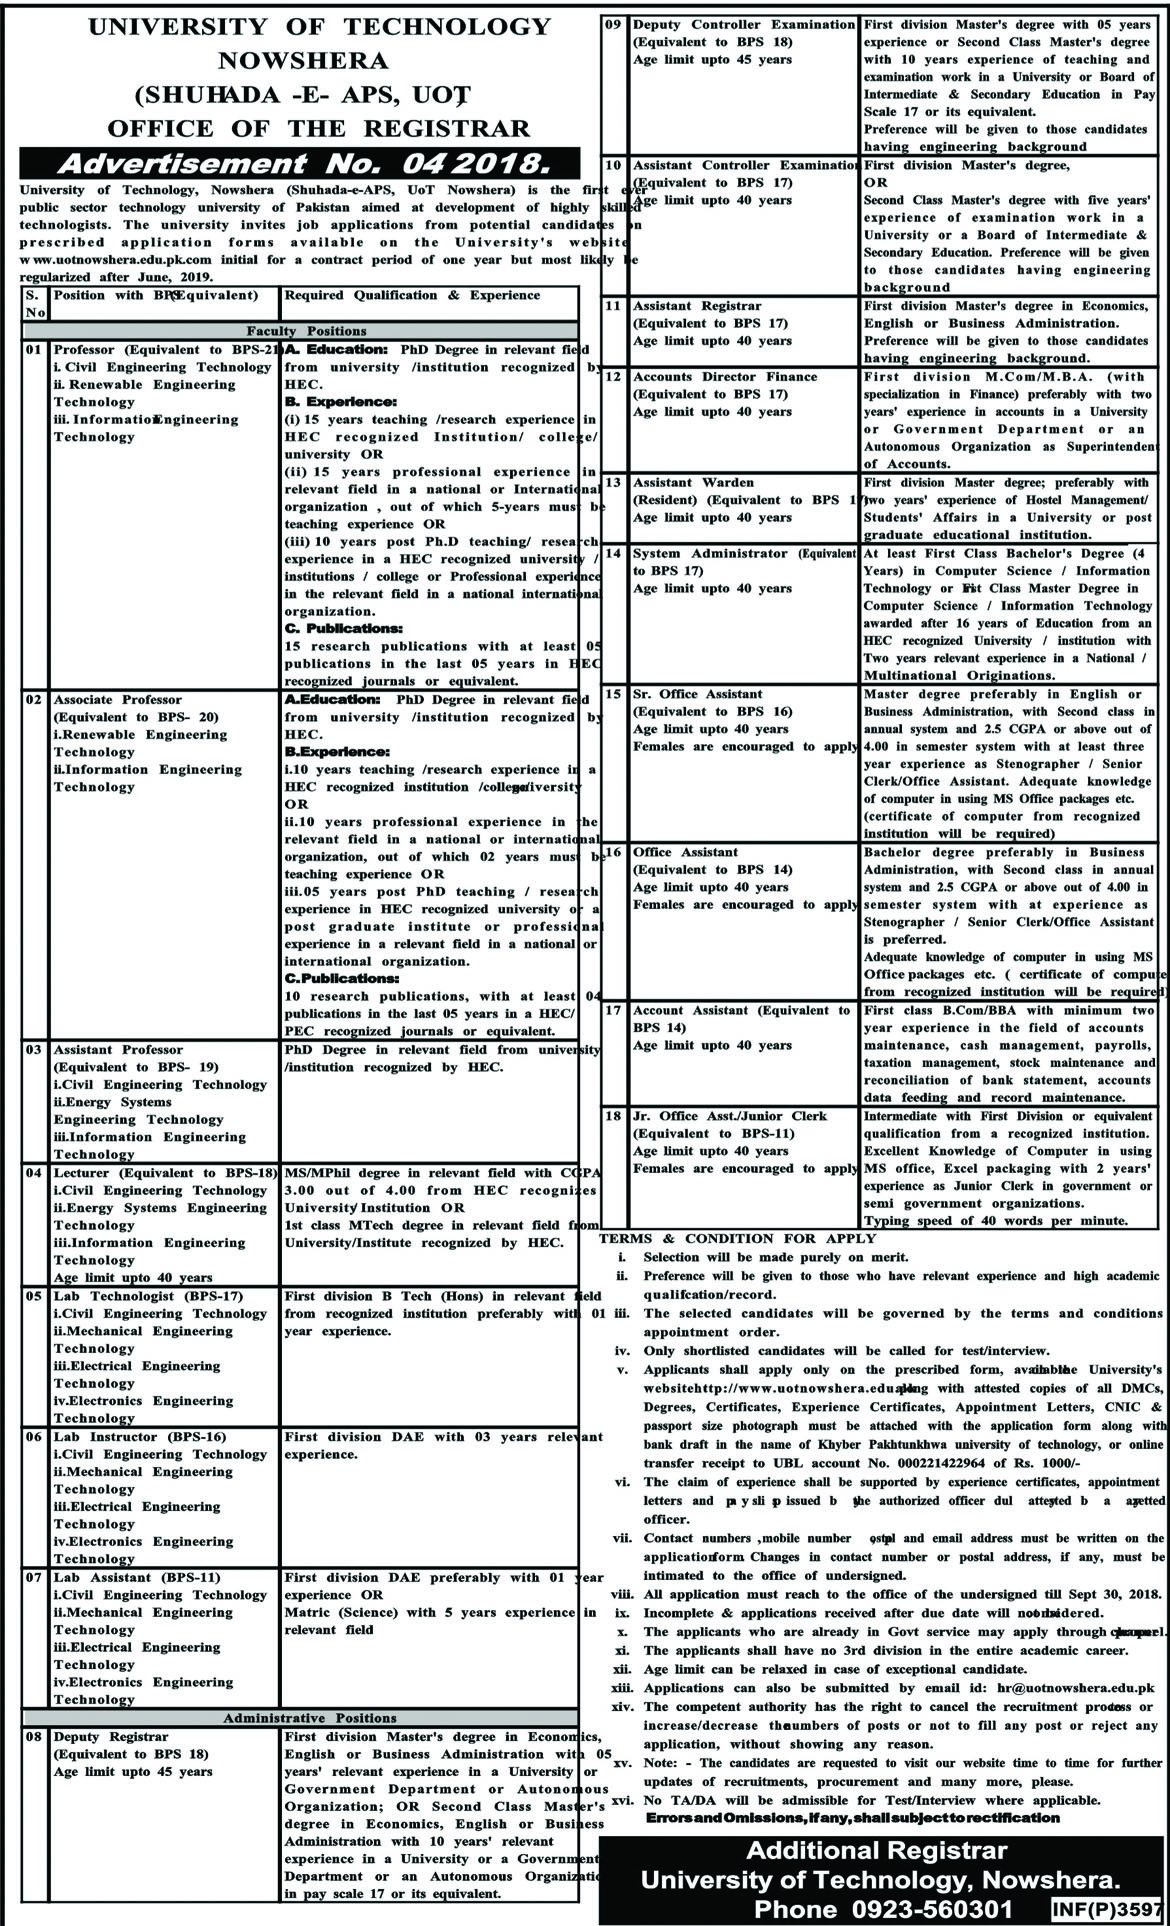 Jobs In University Of Technology Nowshera 13 Sep 2018